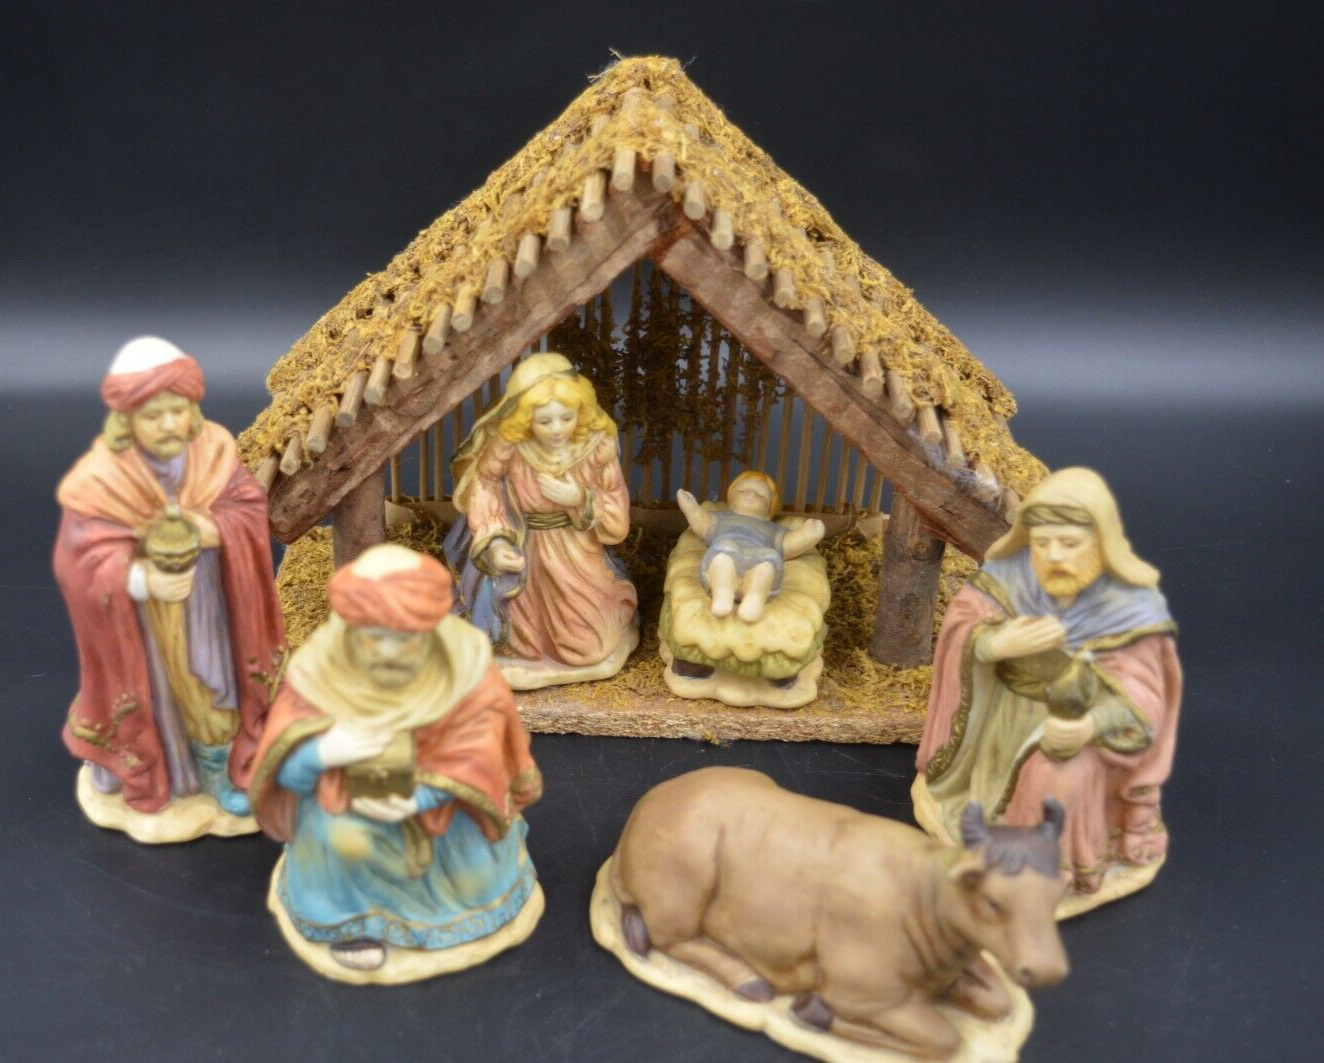 Vintage Wood Moss Manger Stable Christmas Baby Jesus Mary Nativity Set 7PC